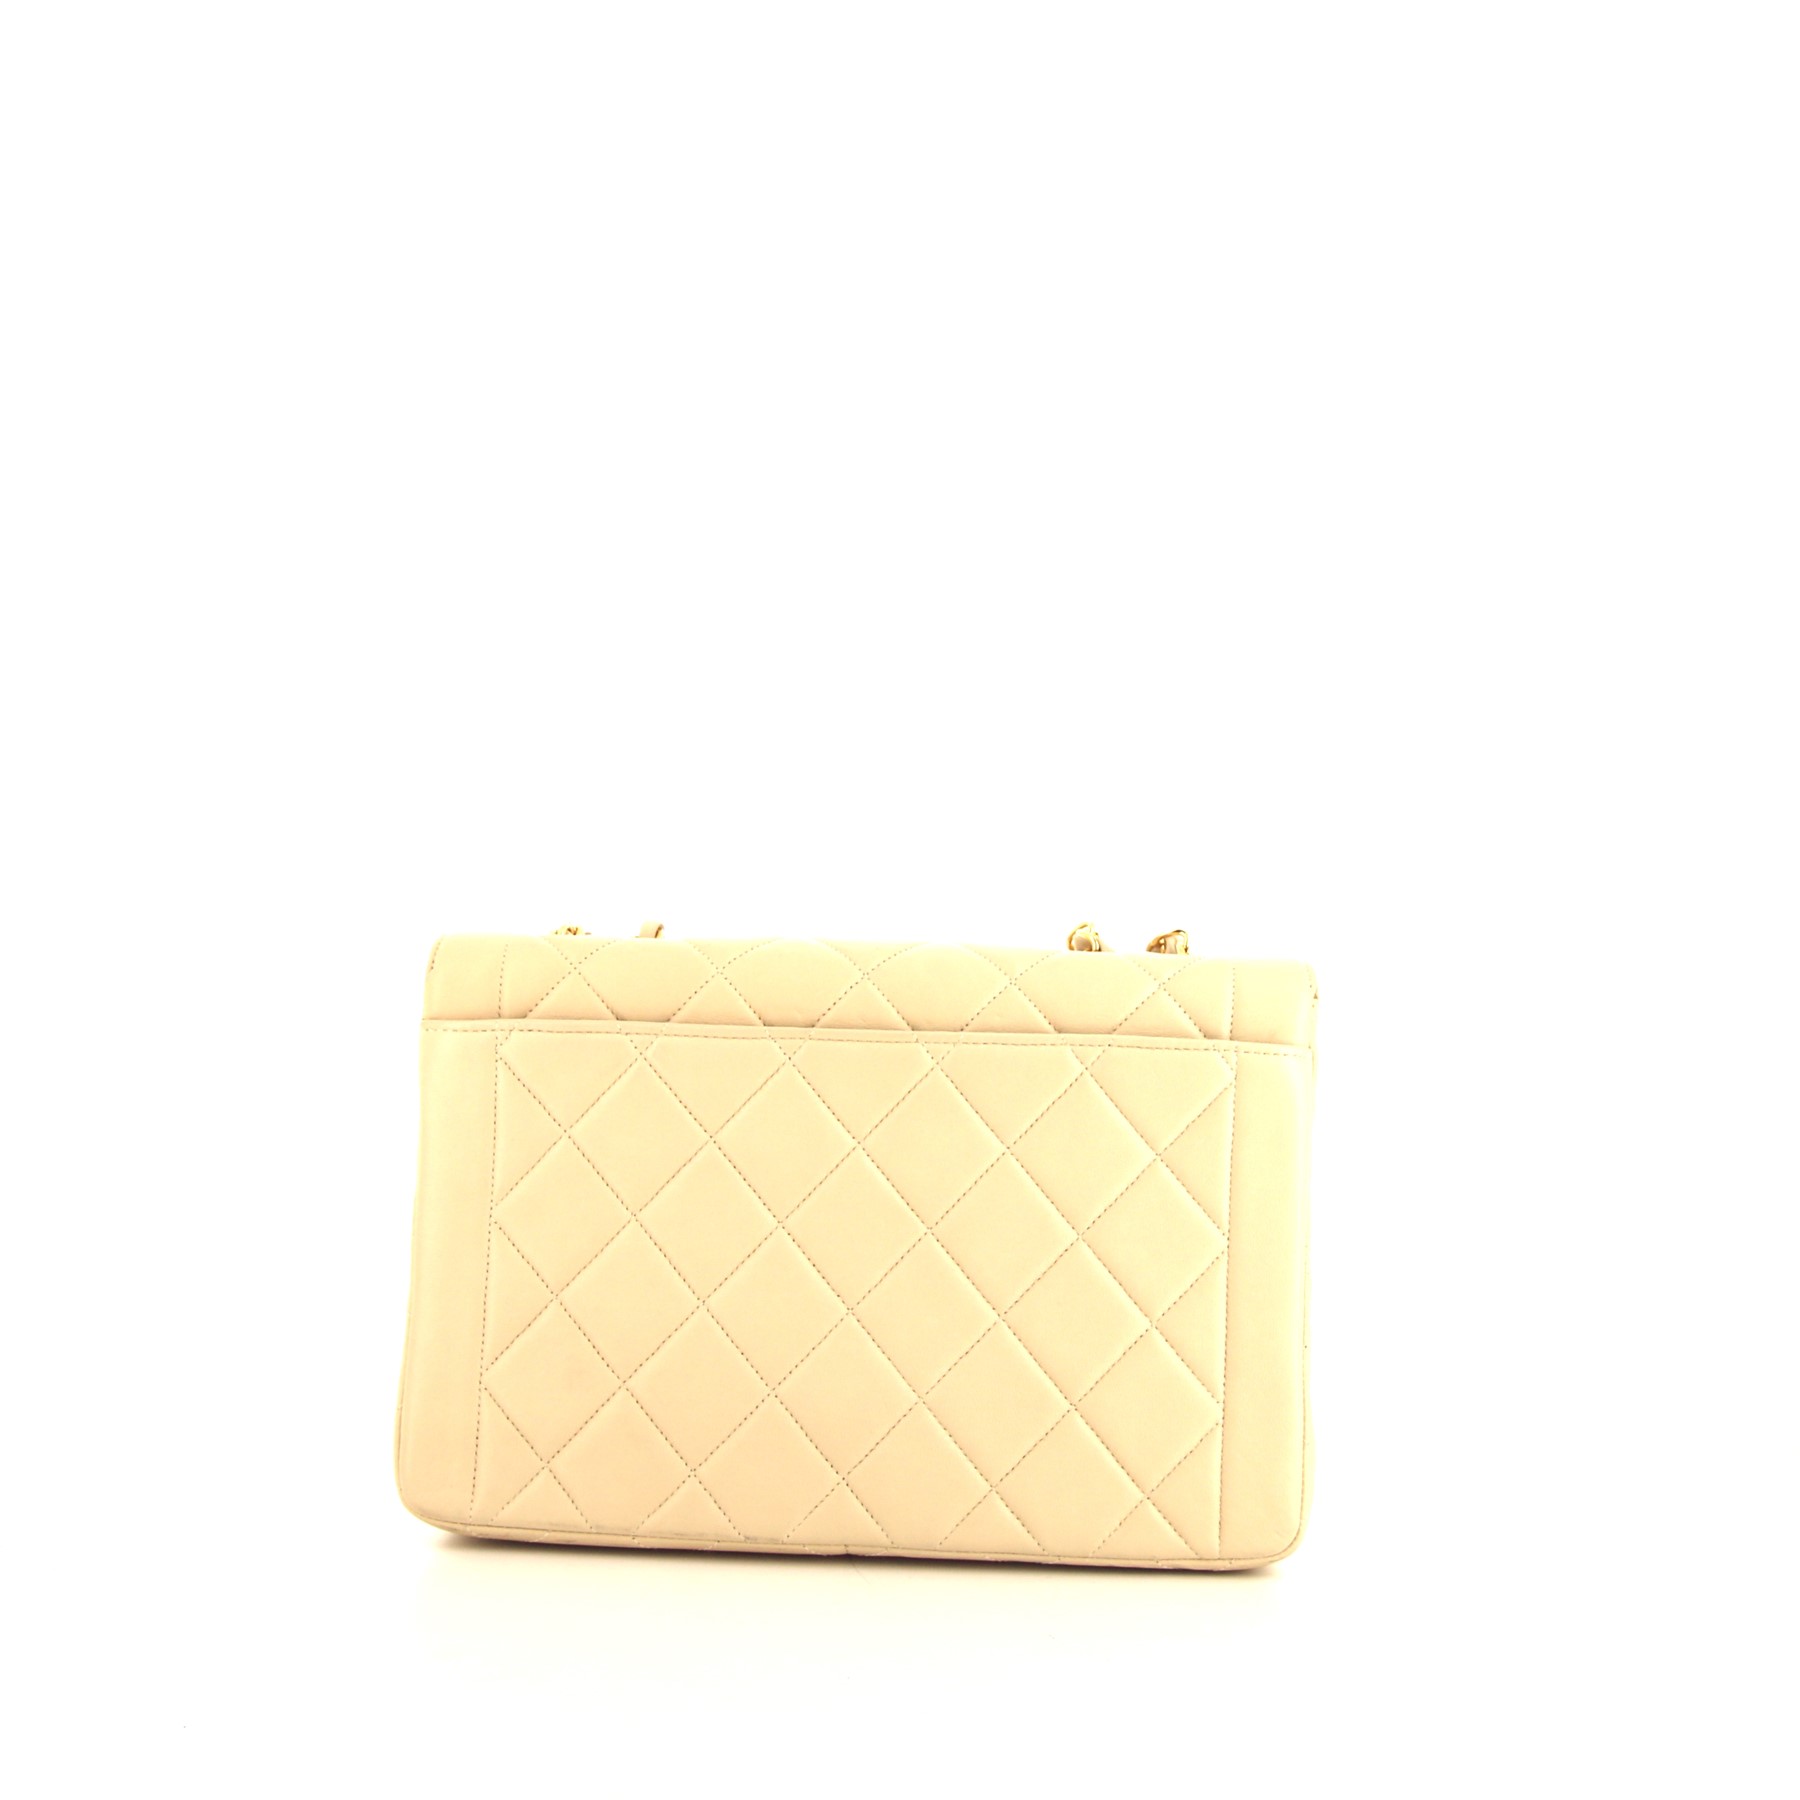 Handbag In Cream Color Quilted Leather